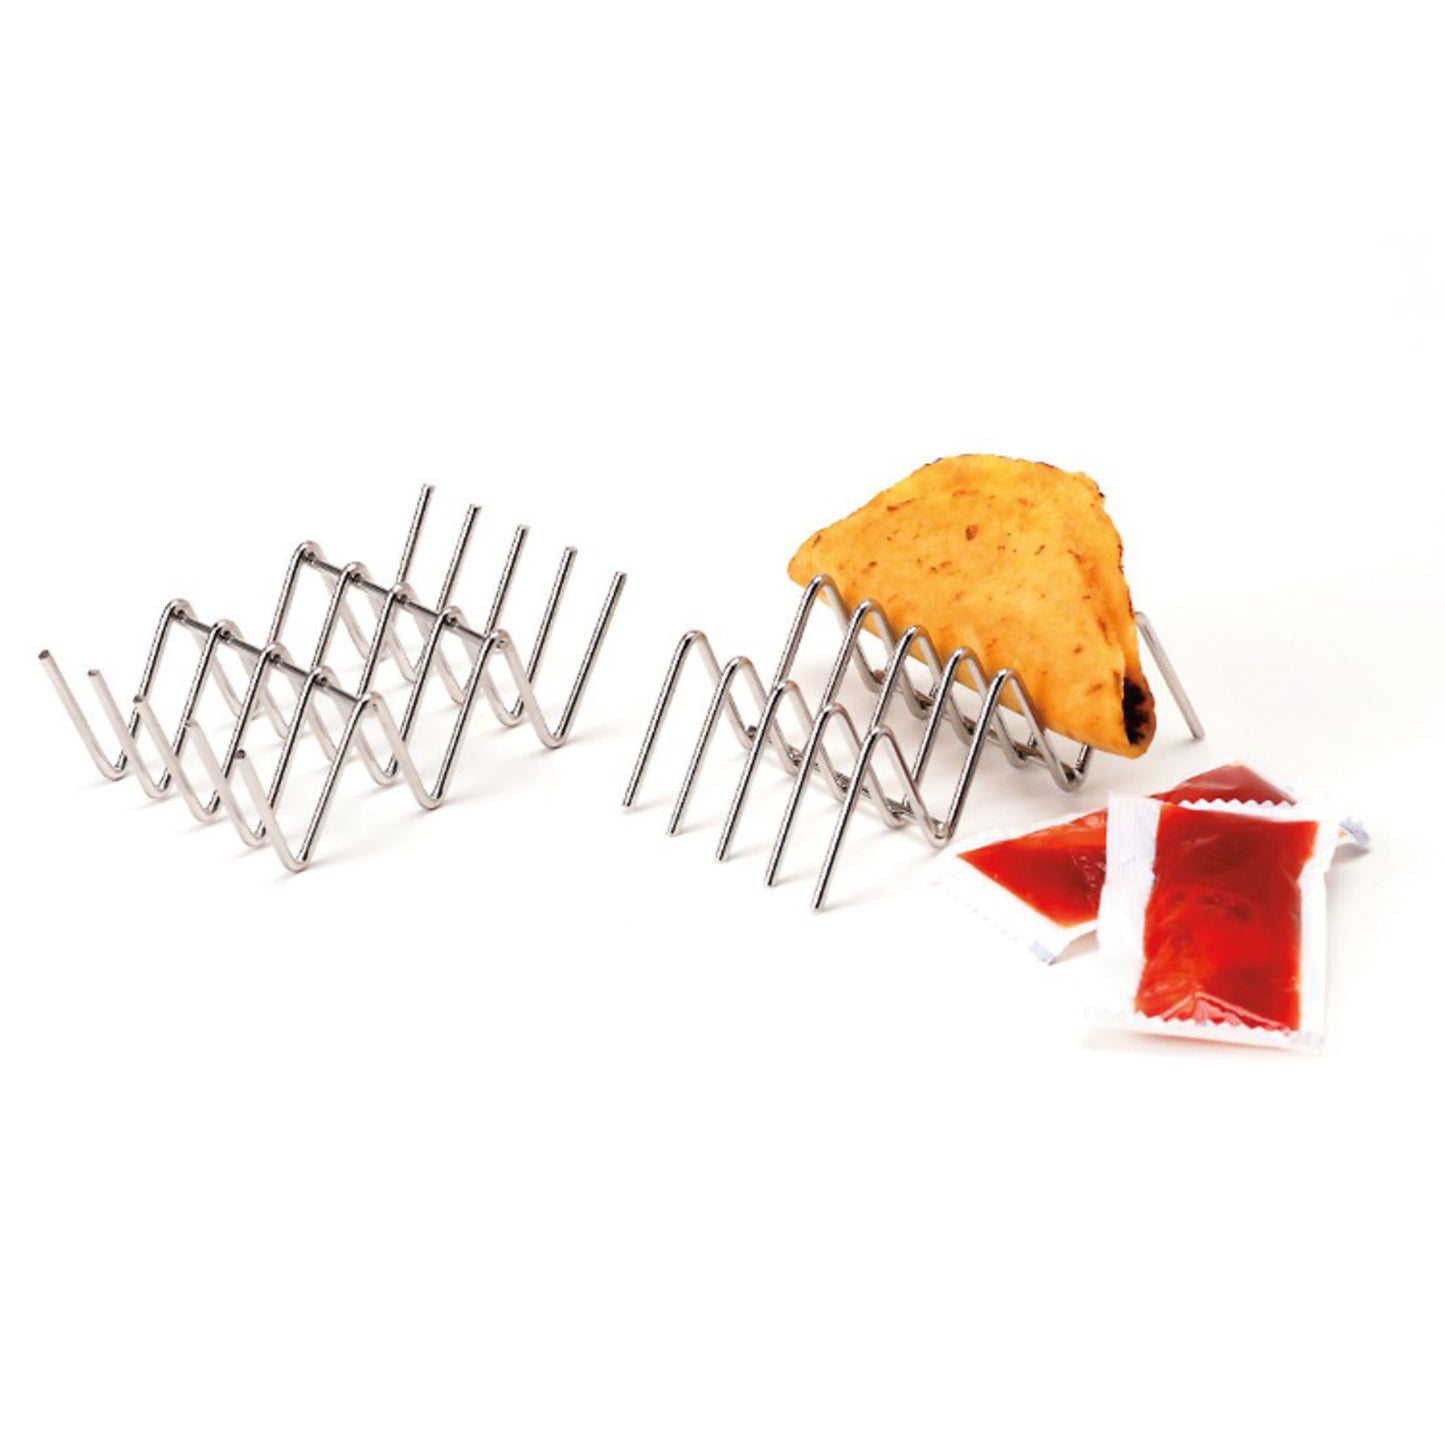 4" x 2" Holder for 2 or 3 Tacos, 1.25" Tall